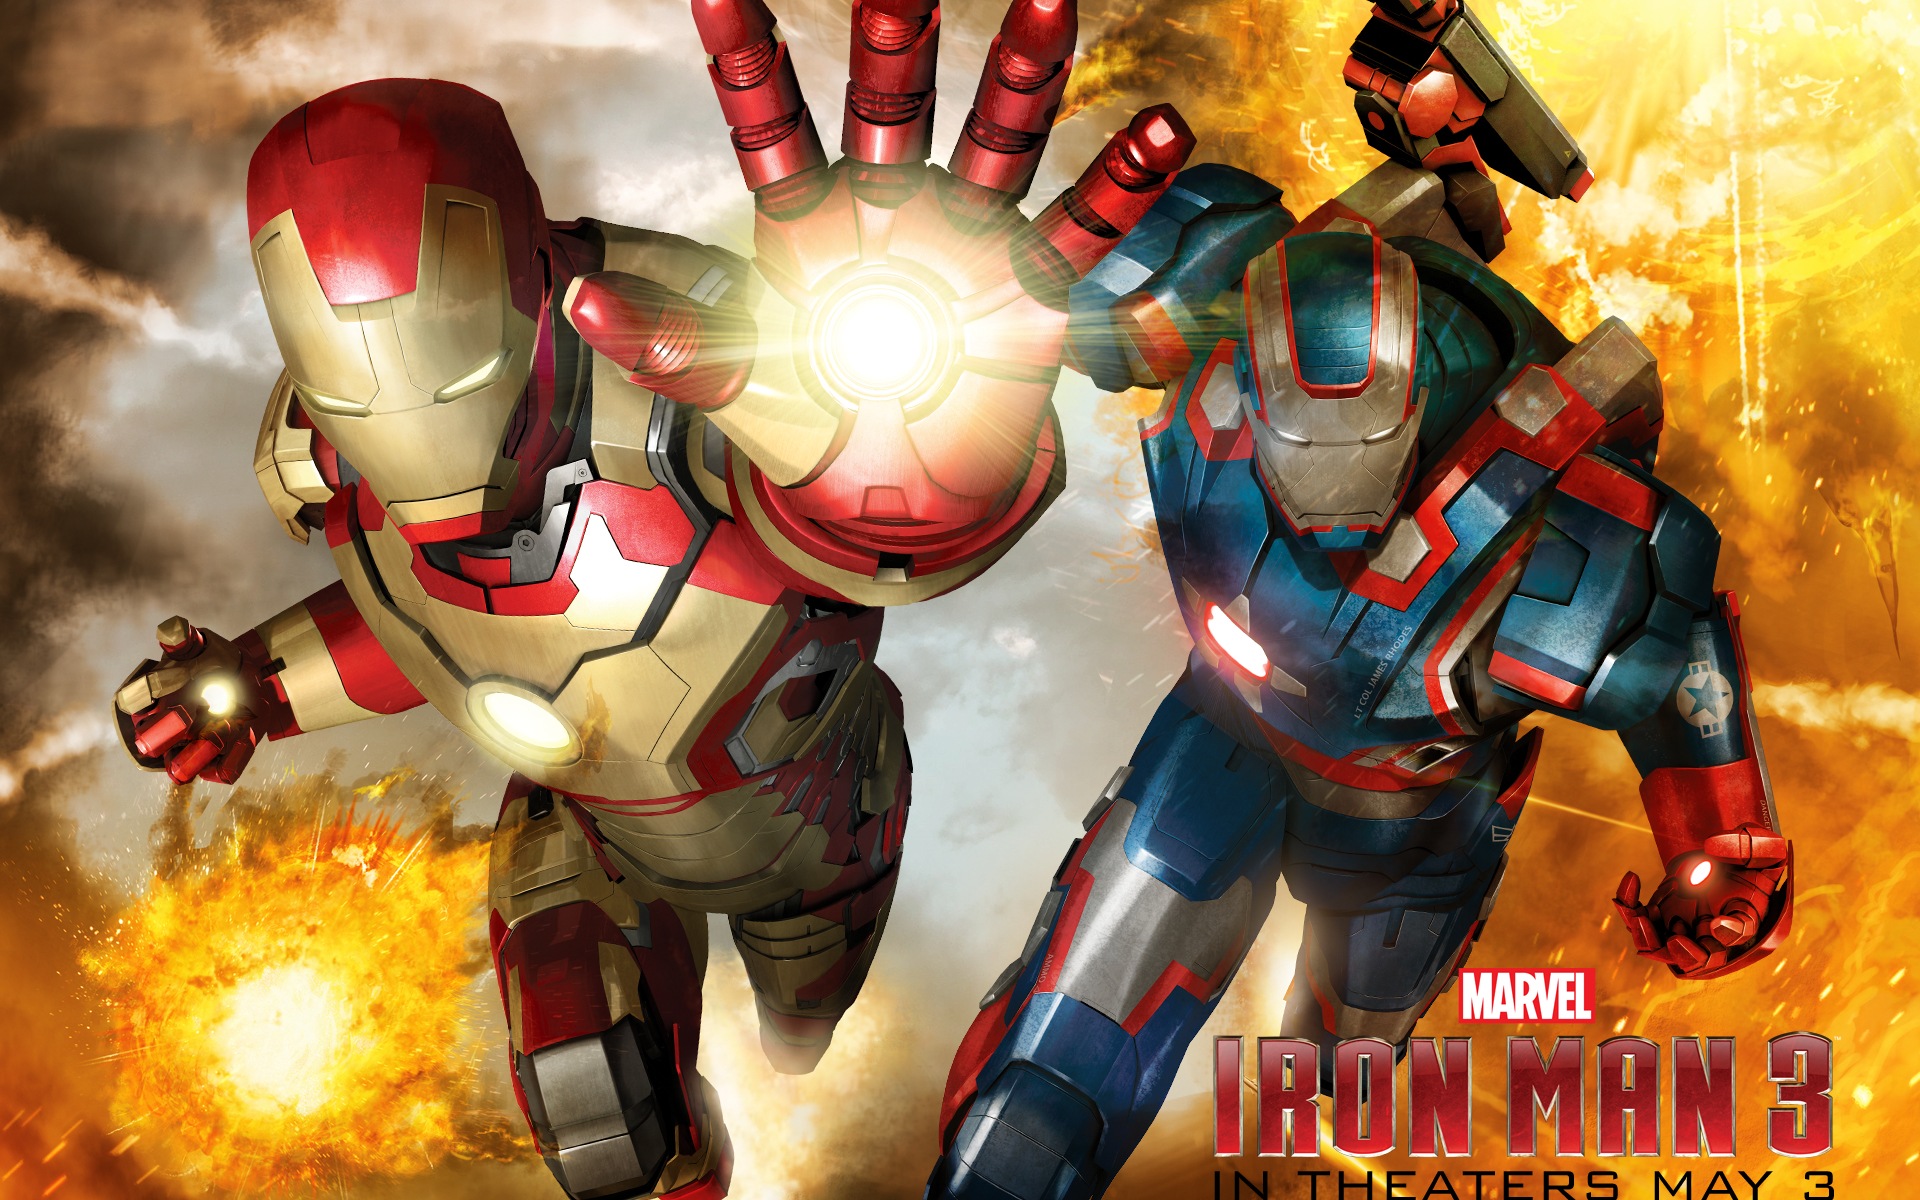 2013 Iron Man 3 newest HD wallpapers #6 - 1920x1200